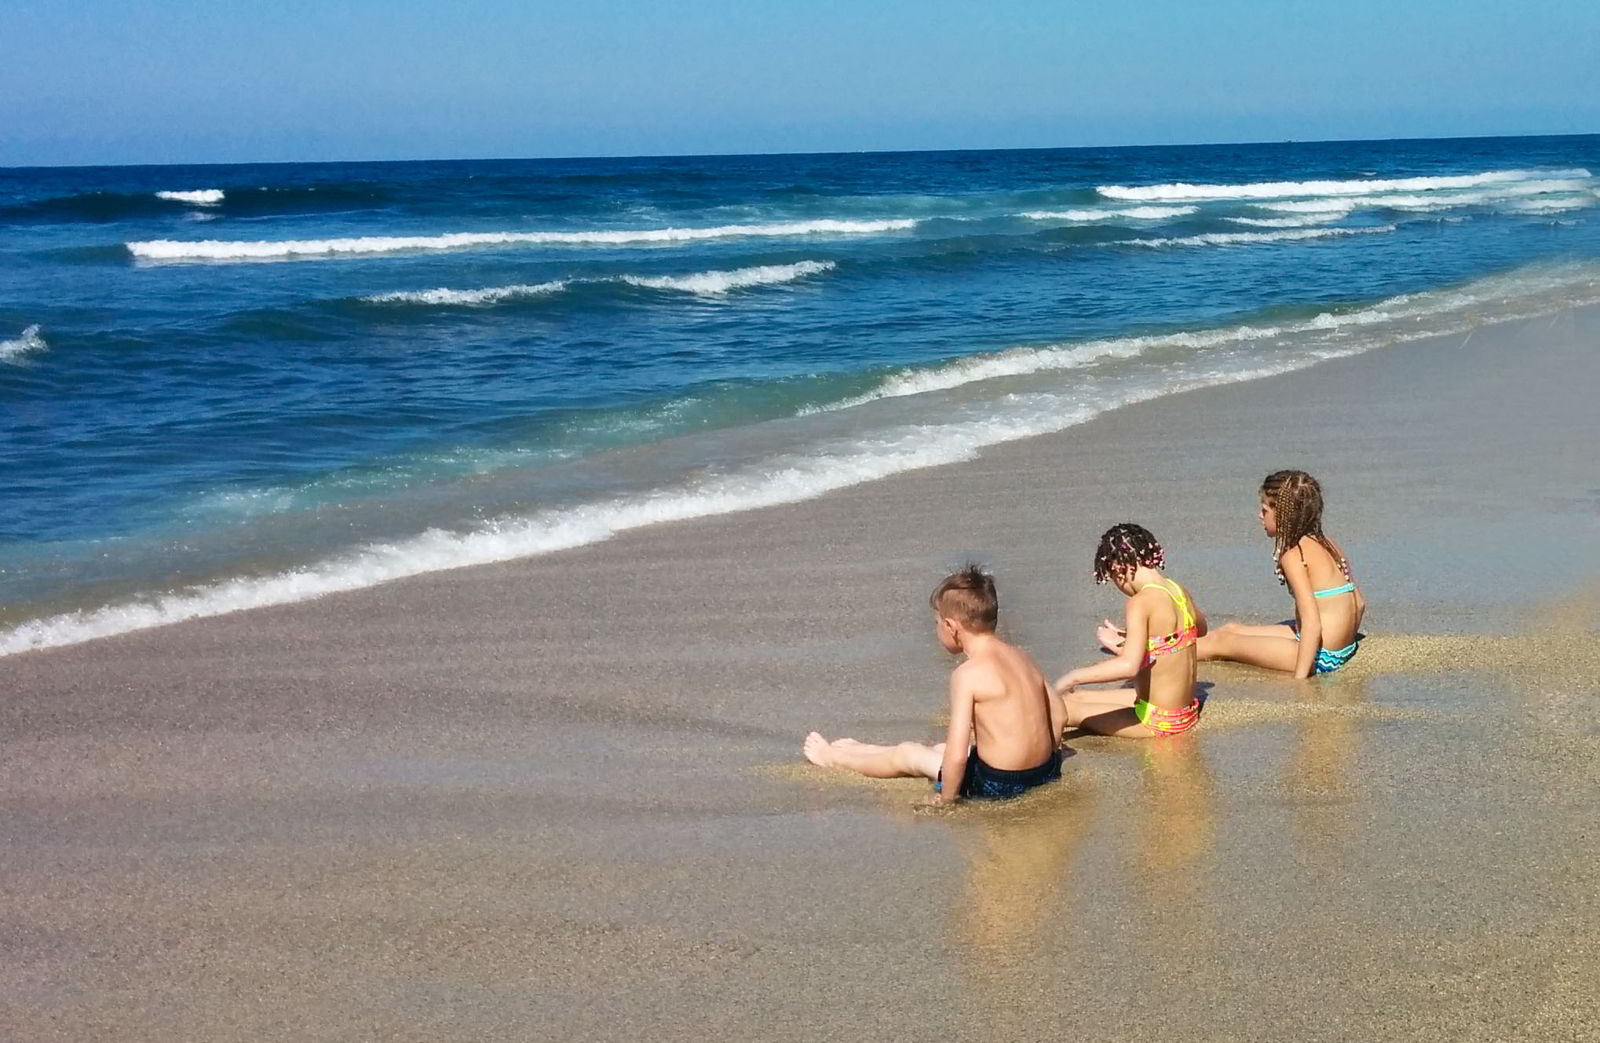 An image of three kids on a beach in Mexico.